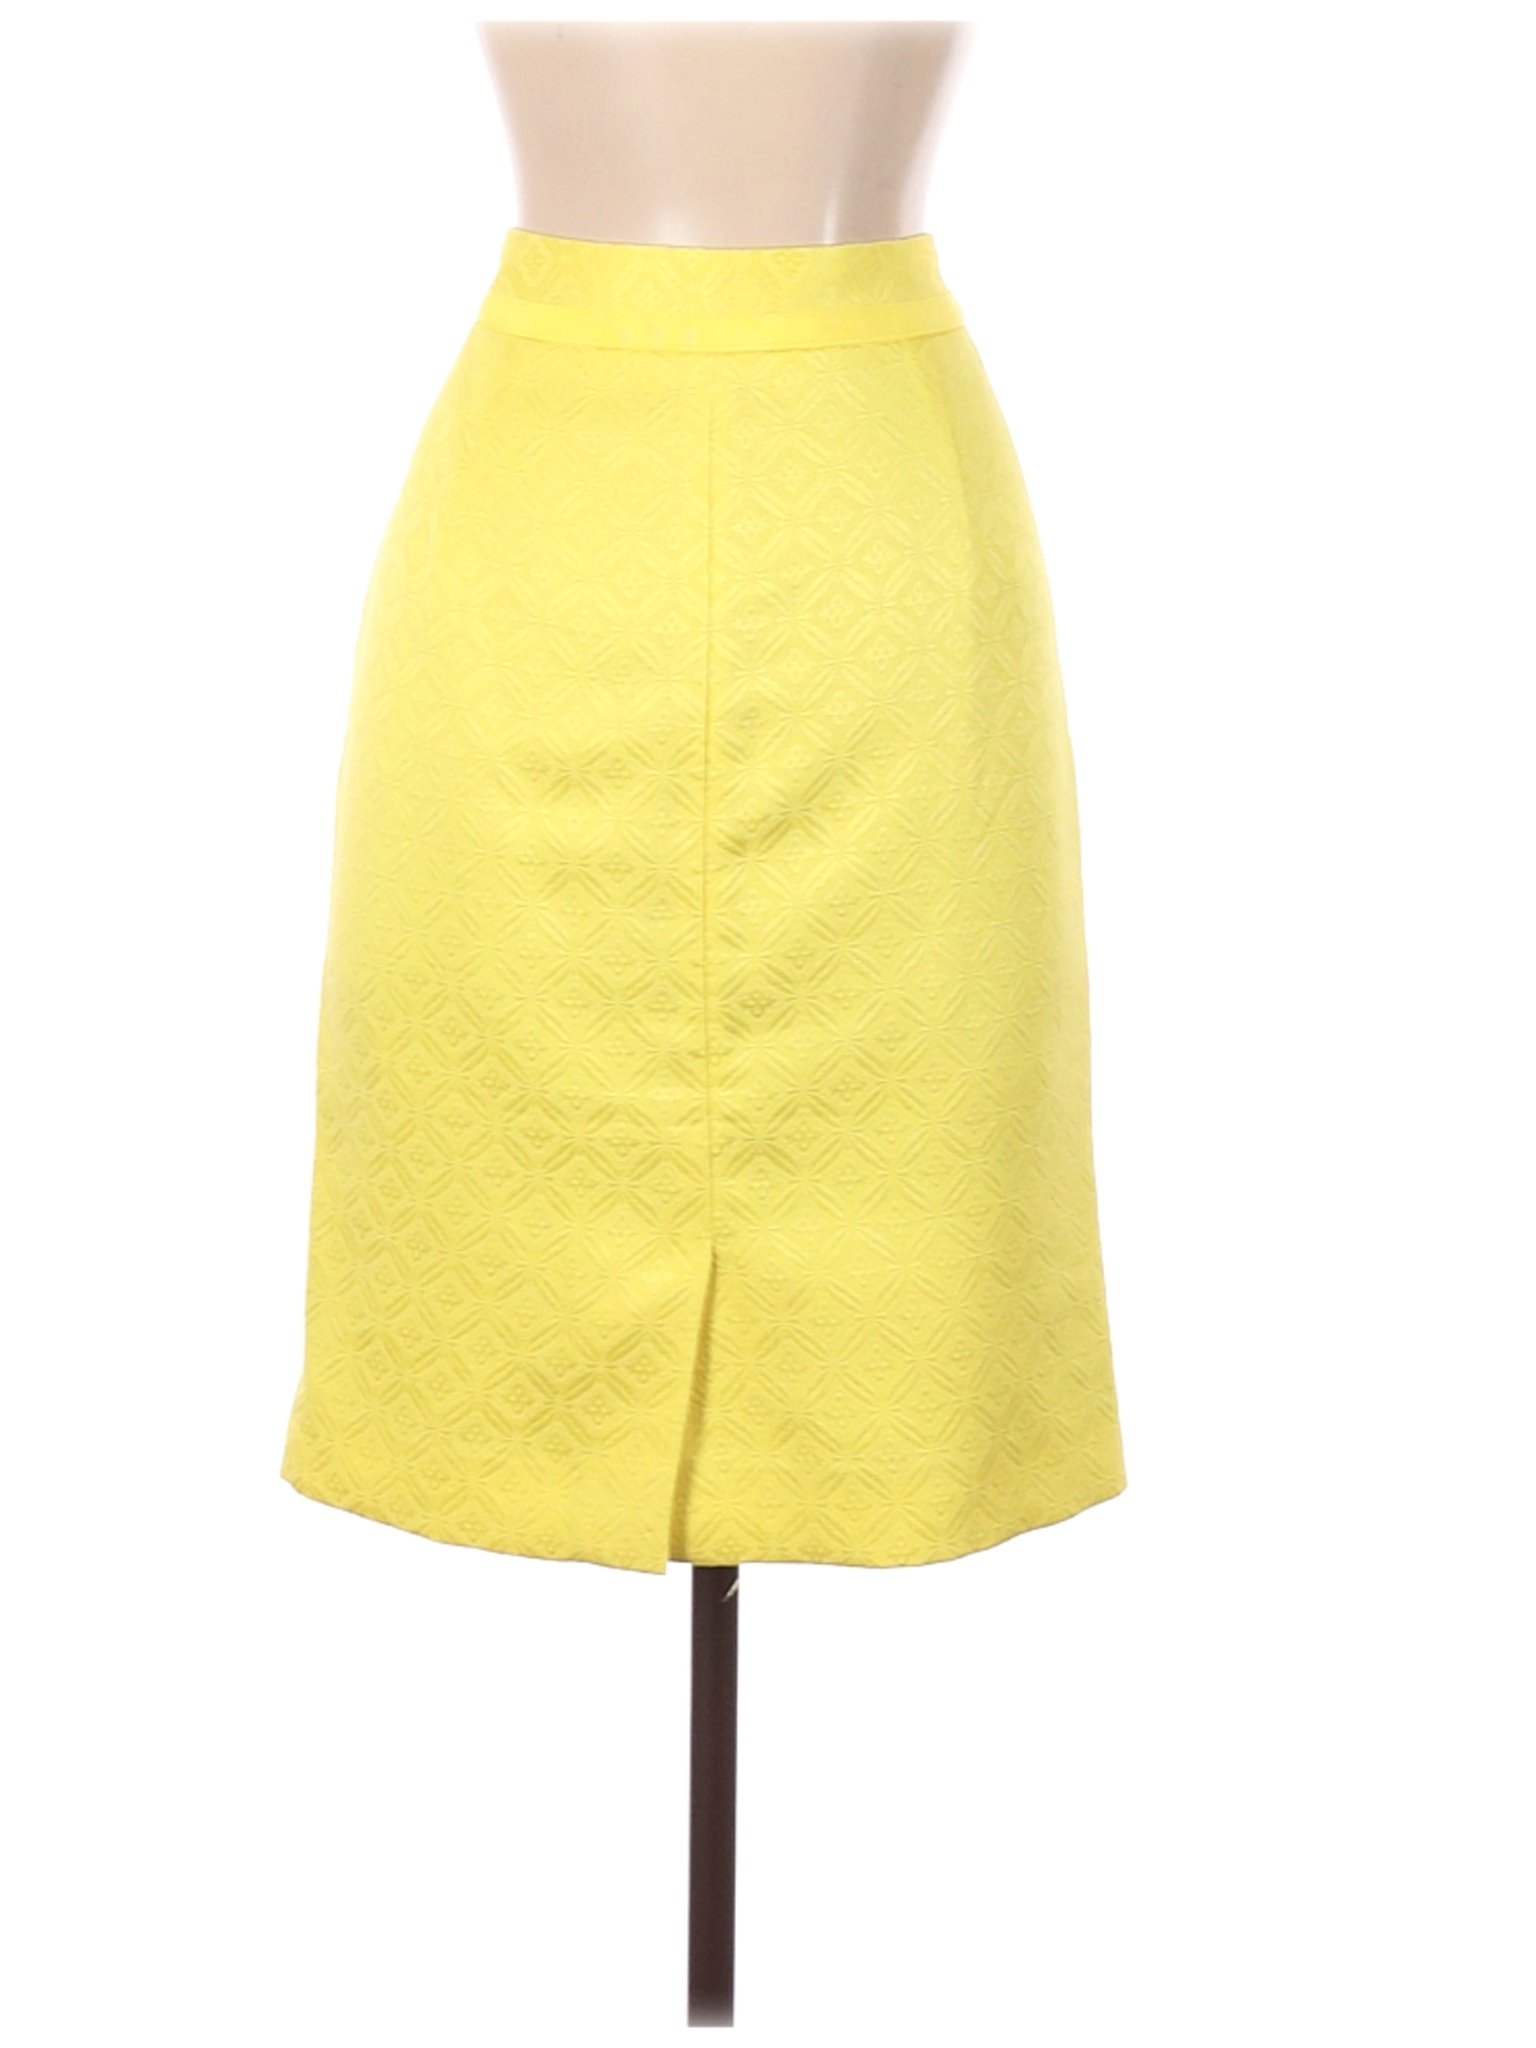 The Limited Women Yellow Casual Skirt 6 | eBay